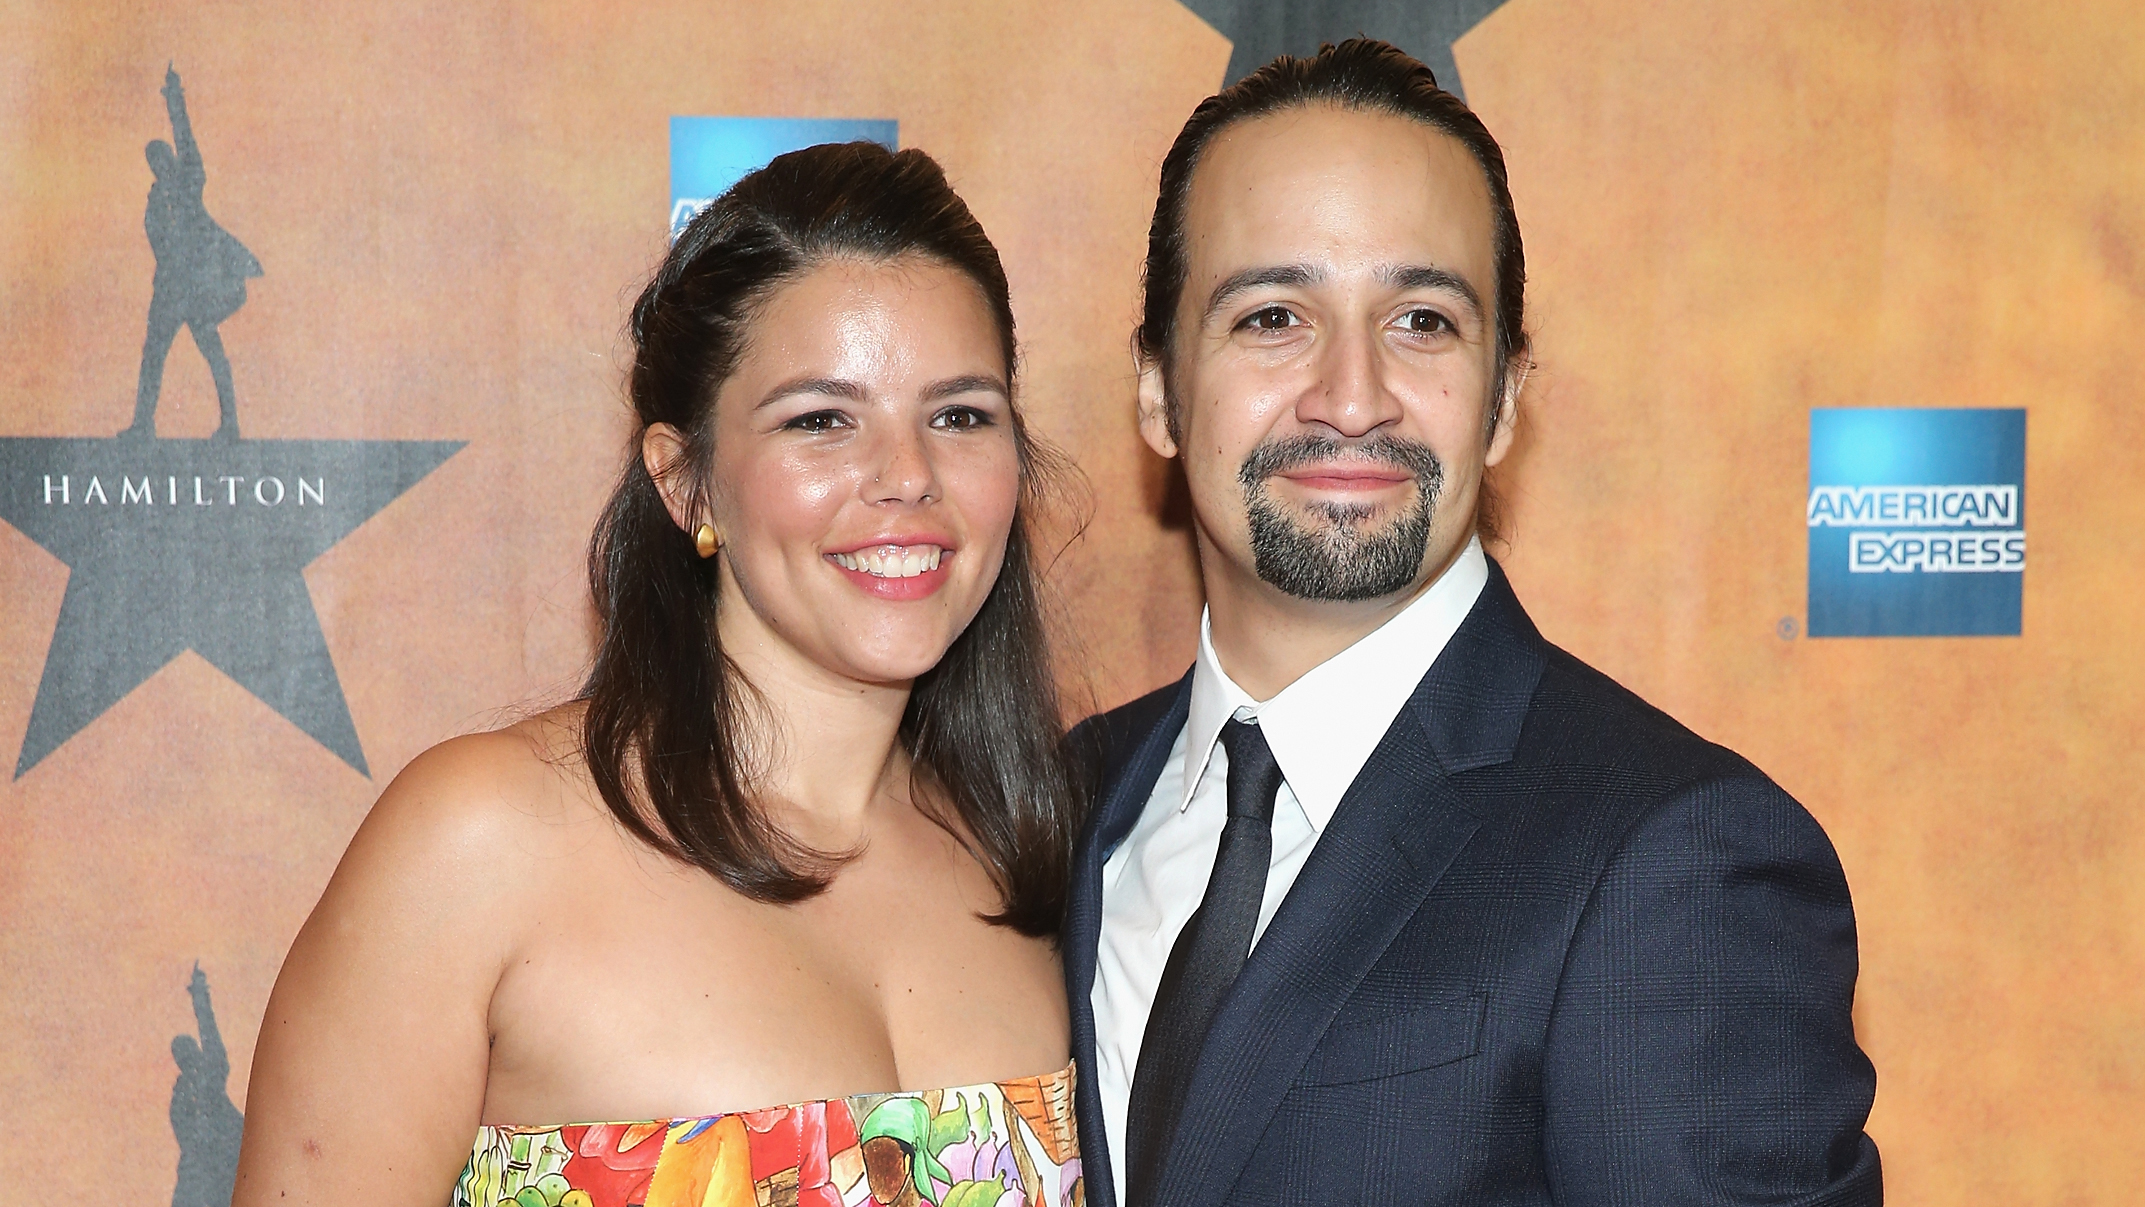 Lin-Manuel Miranda and Wife Vanessa Nadal's Cutest Couple Pictures